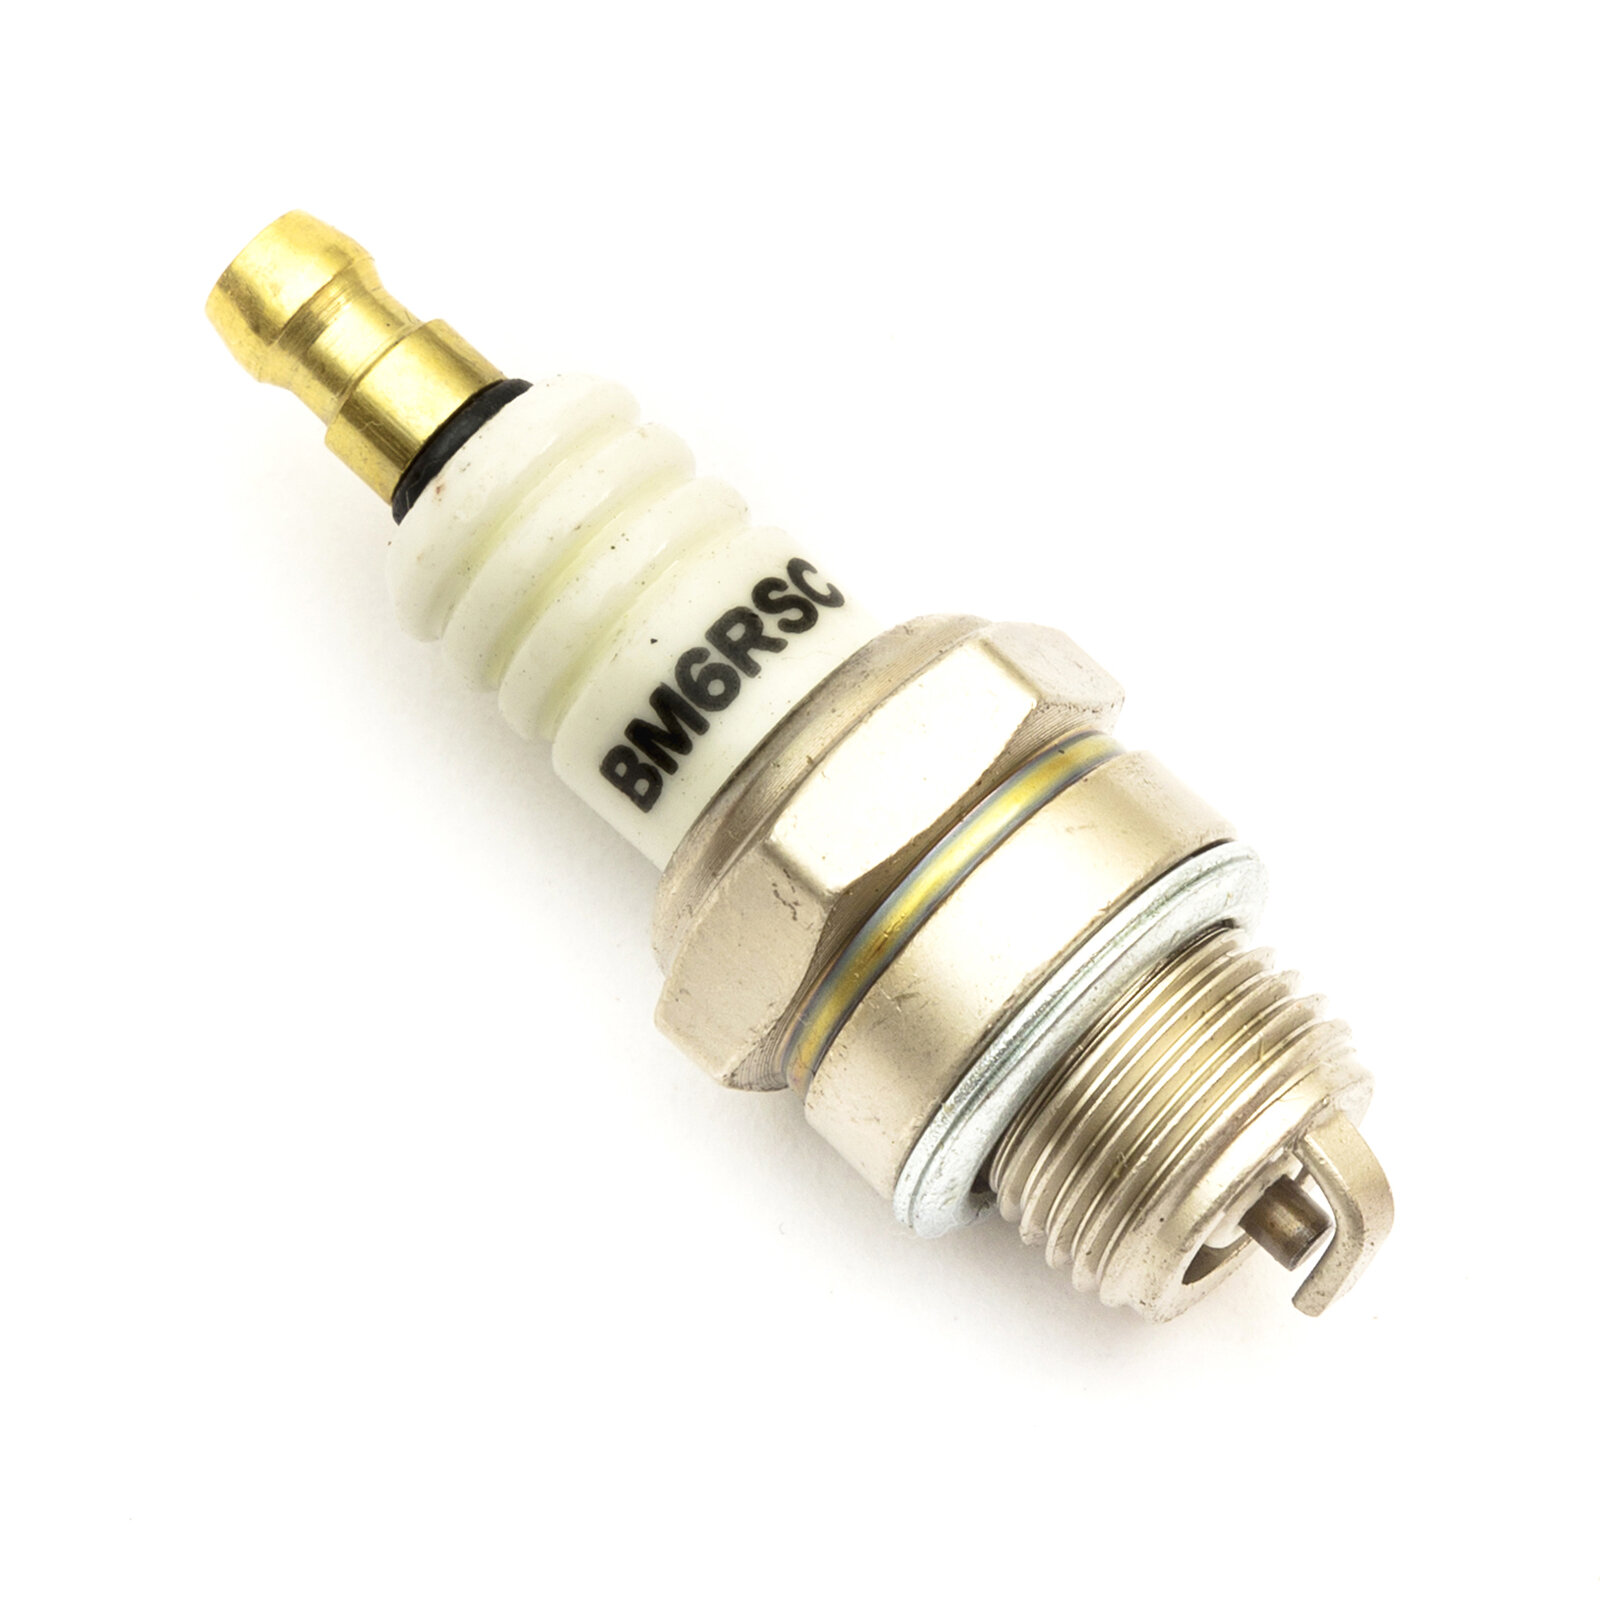 Torch Takumi Spark Plug Replaces NGK BMR6A Fits Flymo RL420 Lawnmower